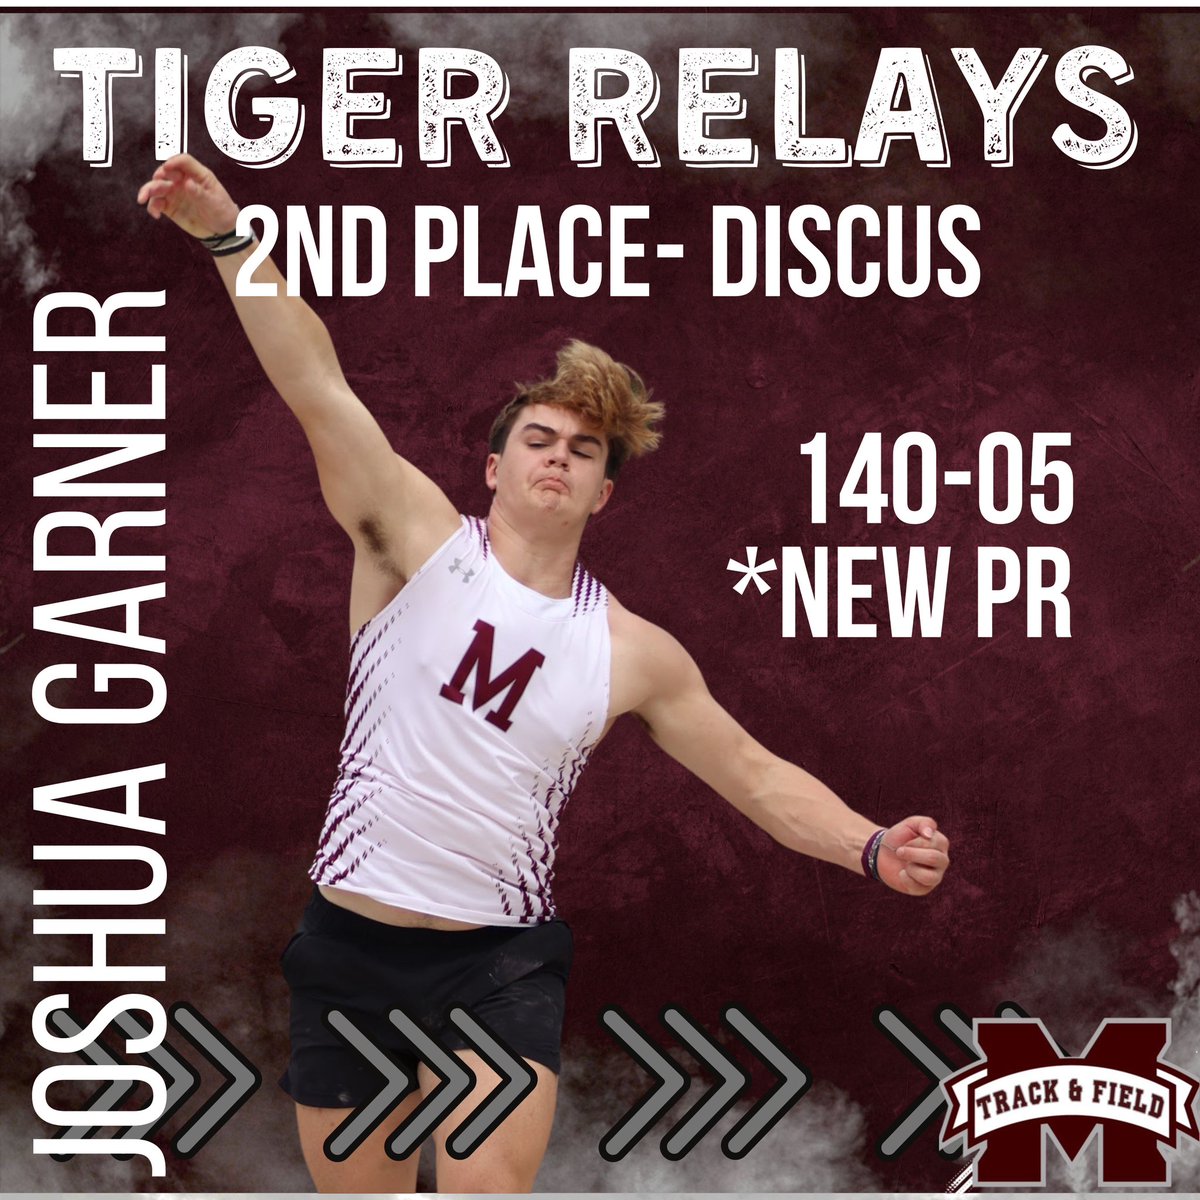 PRs were set and medals were earned at the Tiger Relays🔥 @DogFootball @MagISDAthletics @MagnoliaHighTX @Quinn_MHS @CoachMartin_18 @CoachBlackshire @str8texn @David_Allison39